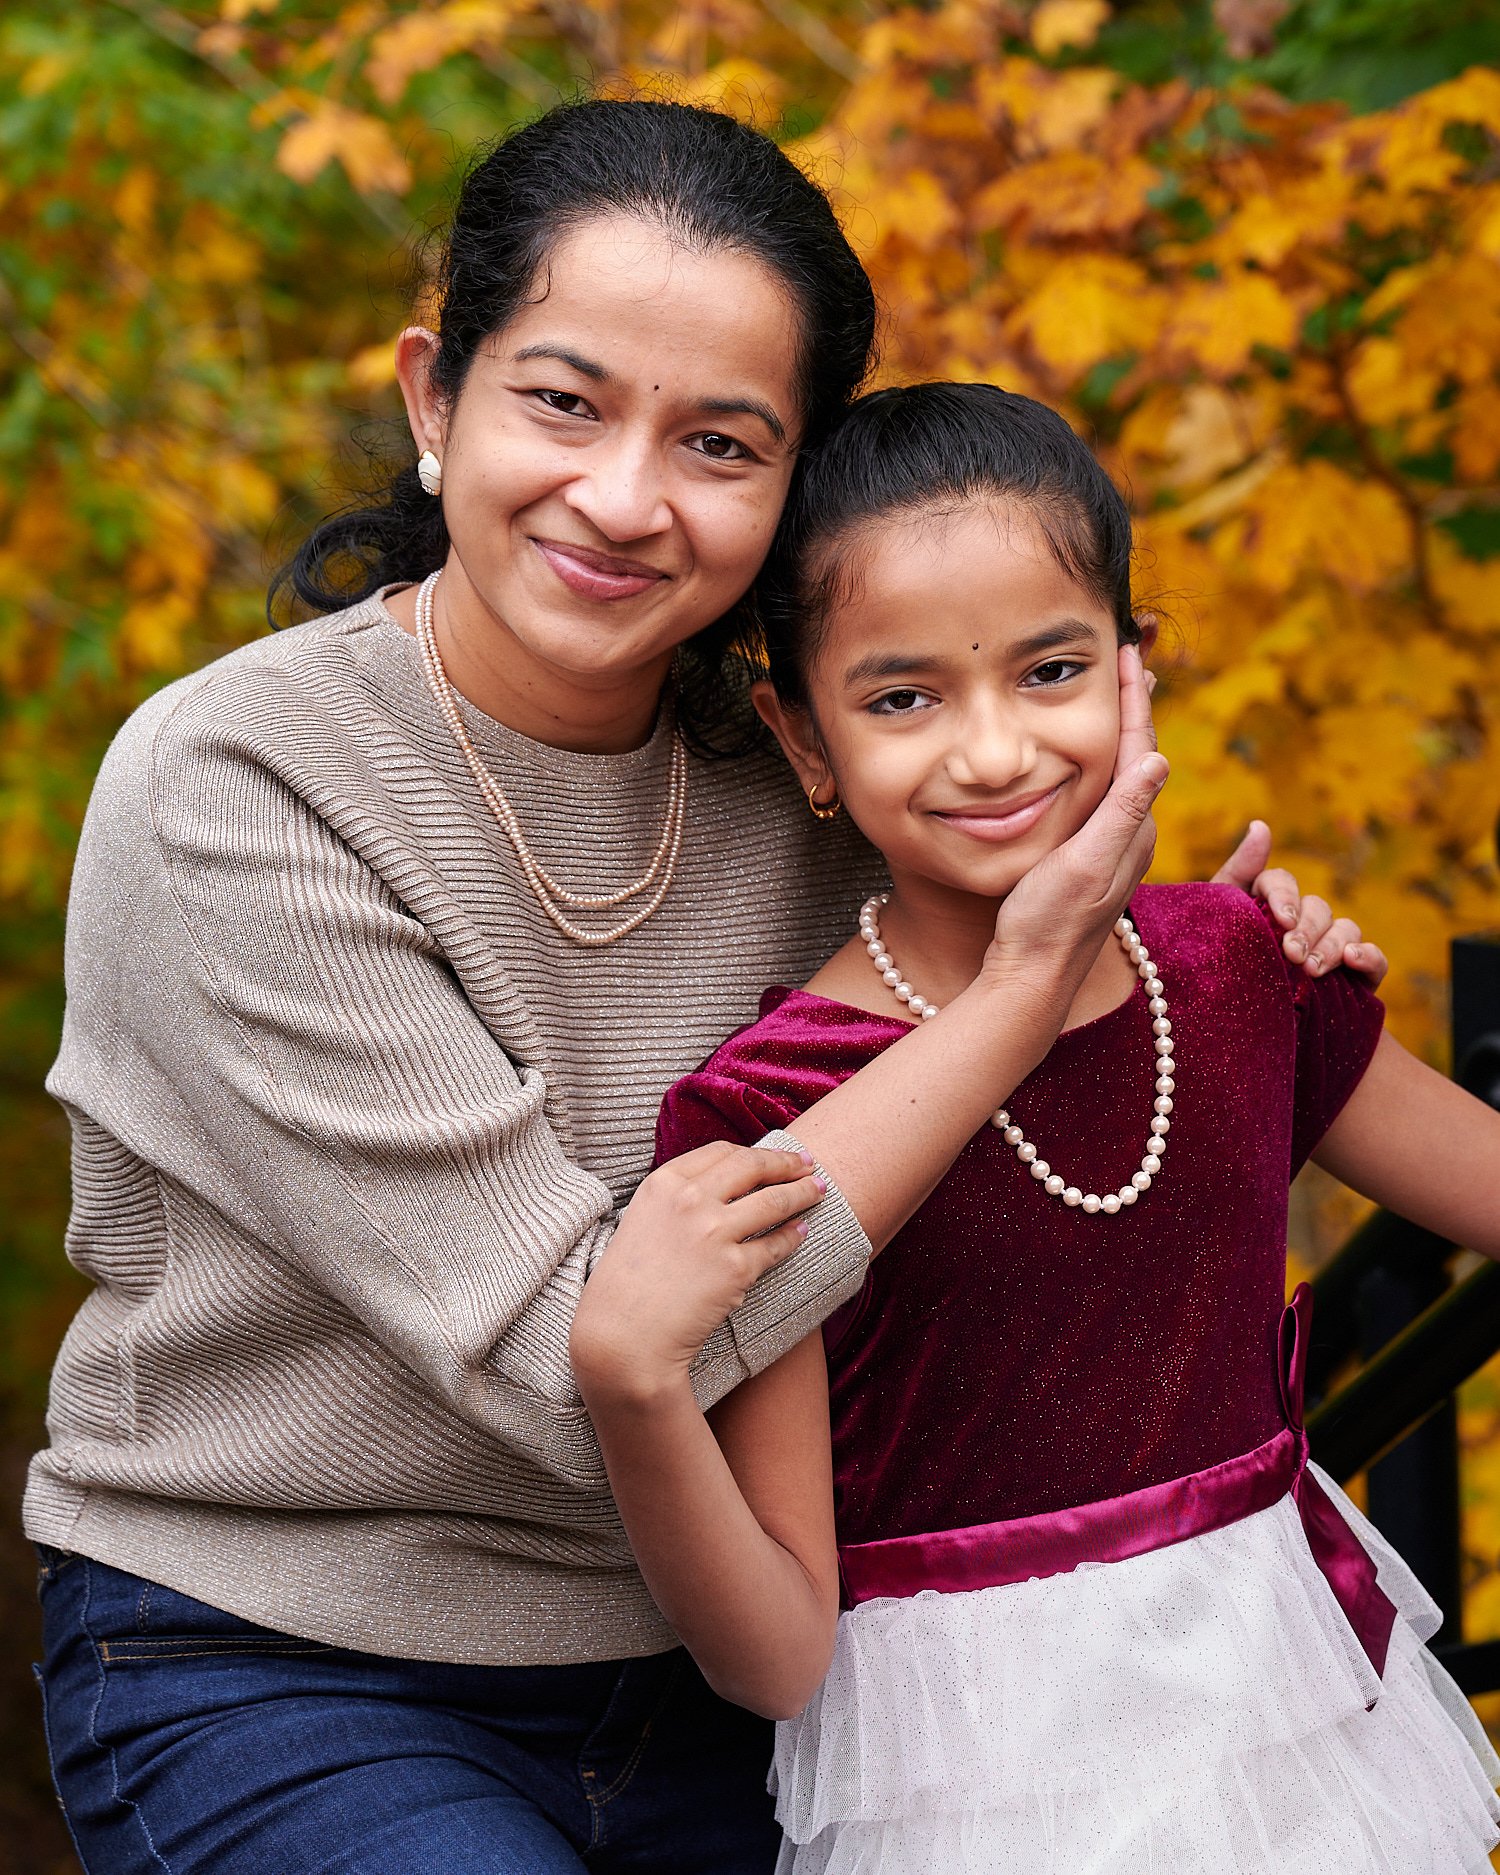  Mother  is posing with her pre-teen daughter in front of Phipps Conservatory and Botanical Gardens of Pittsburgh, Pennsylvania. The girl is wearing a burgundy ball dress and pearls. 